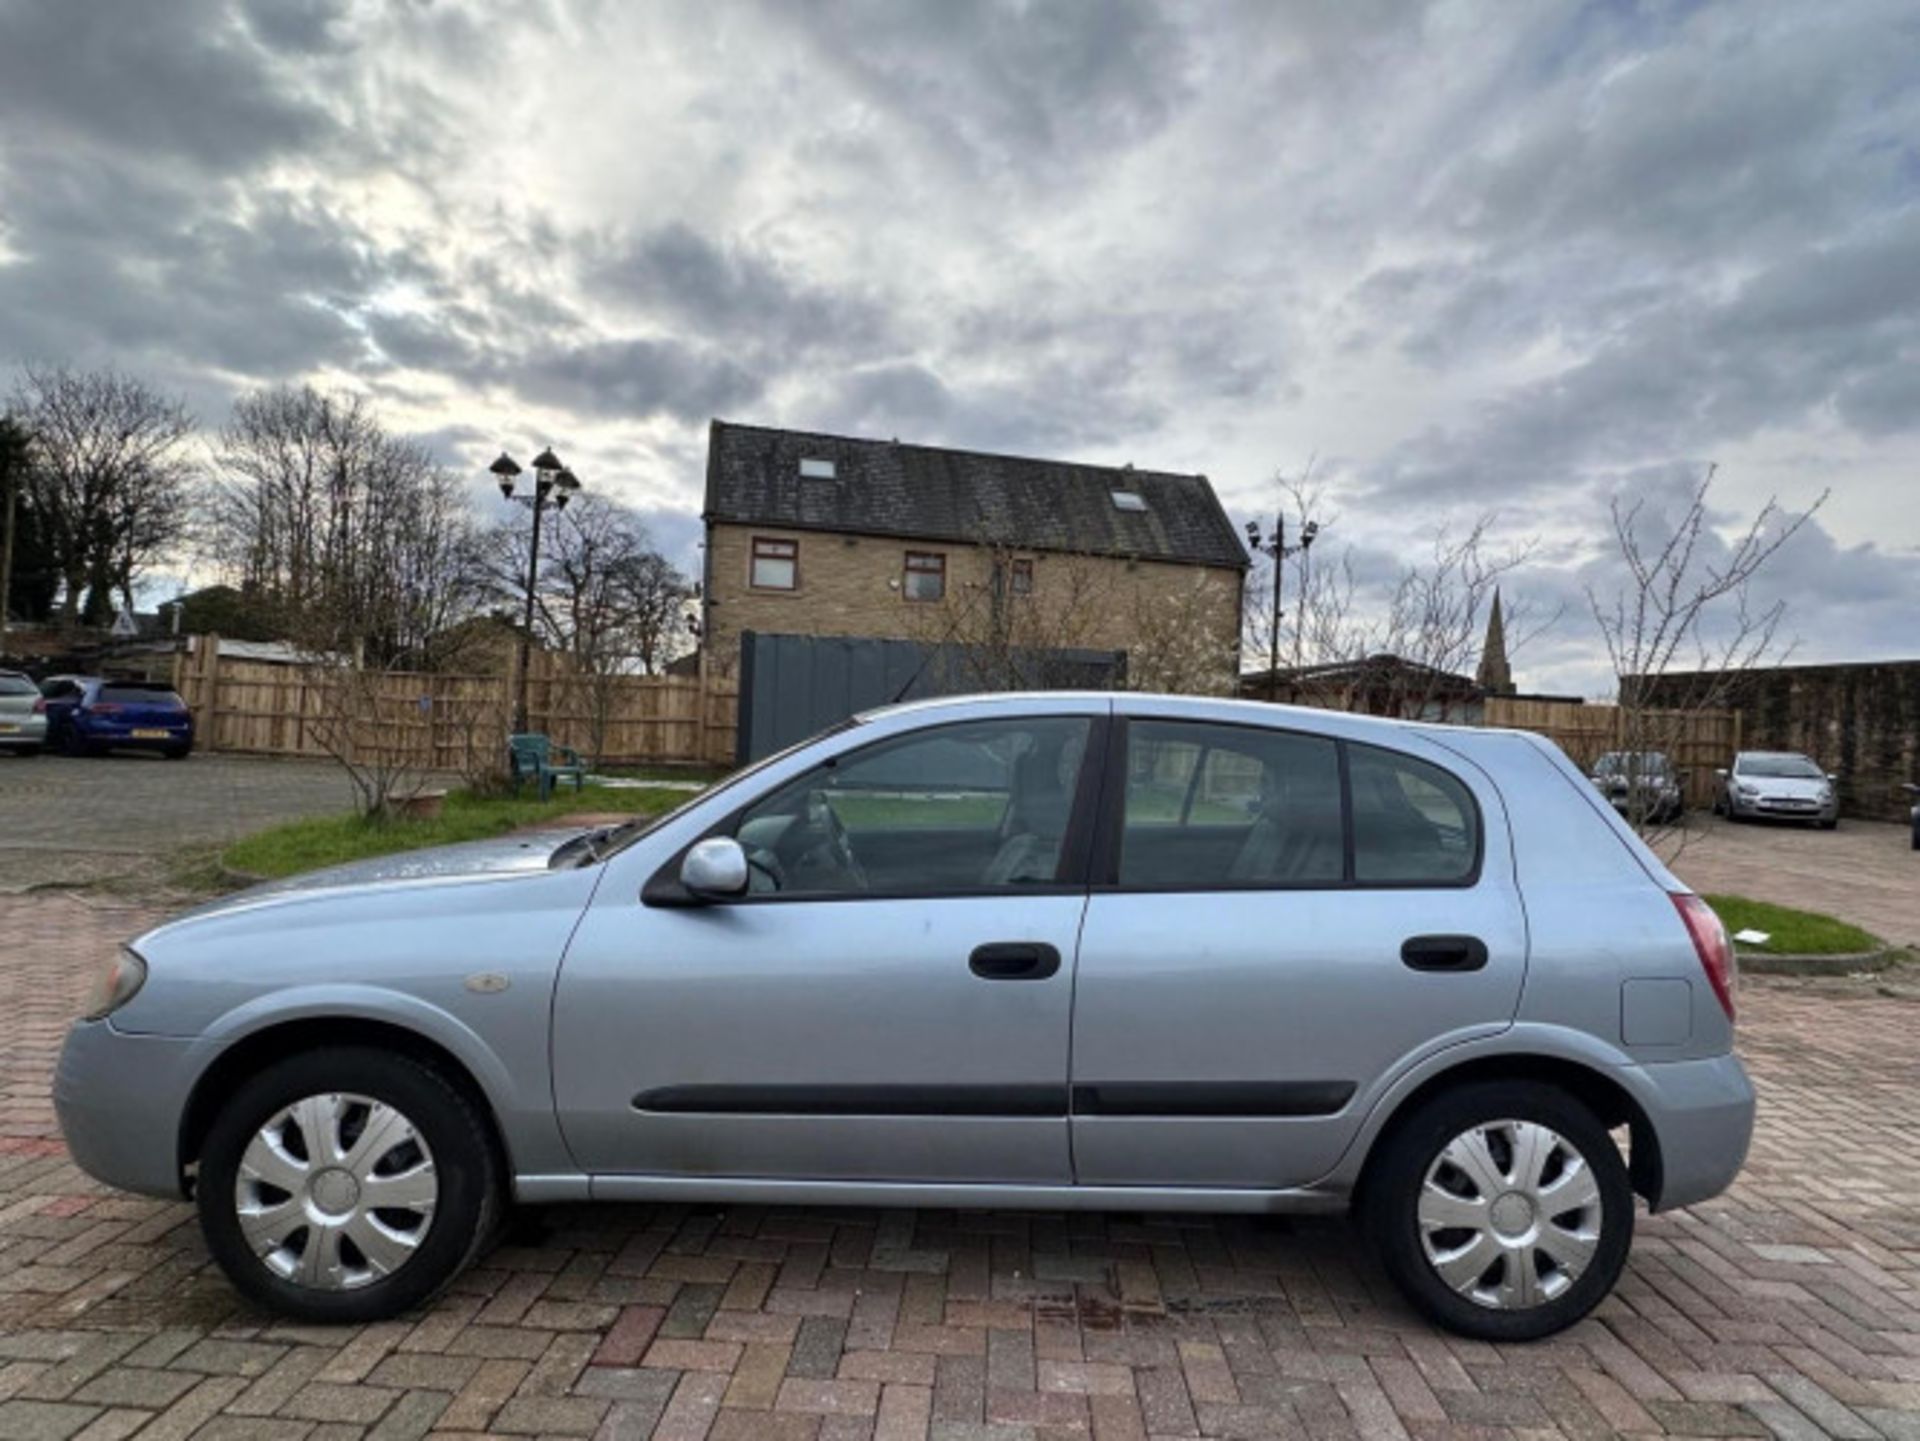 2006 NISSAN ALMERA - PERFECT CAR FOR BEGINNERS AND YOUNG LEARNERS >>--NO VAT ON HAMMER--<< - Image 84 of 92